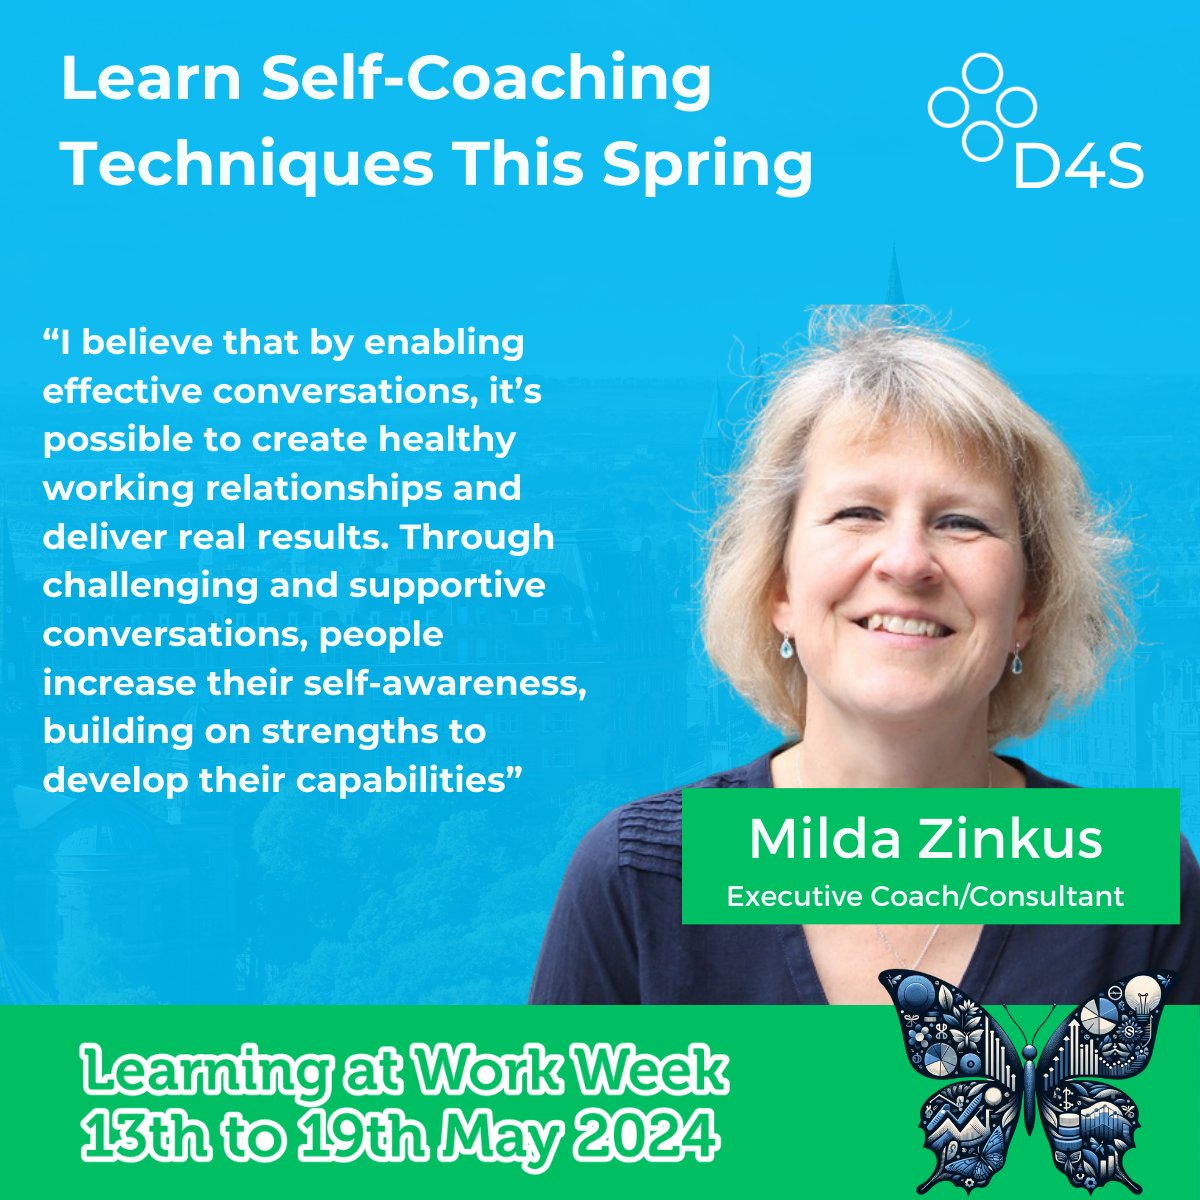 Next Up in our list of #LearningatWorkWeek speakers is Milda Zinkus.

Learn self-coaching techniques this spring✨

Drop us a line if you'd like to explore availability & pricing for this session. @LAWWeekWire 

designed4success.co.uk/event-details/…